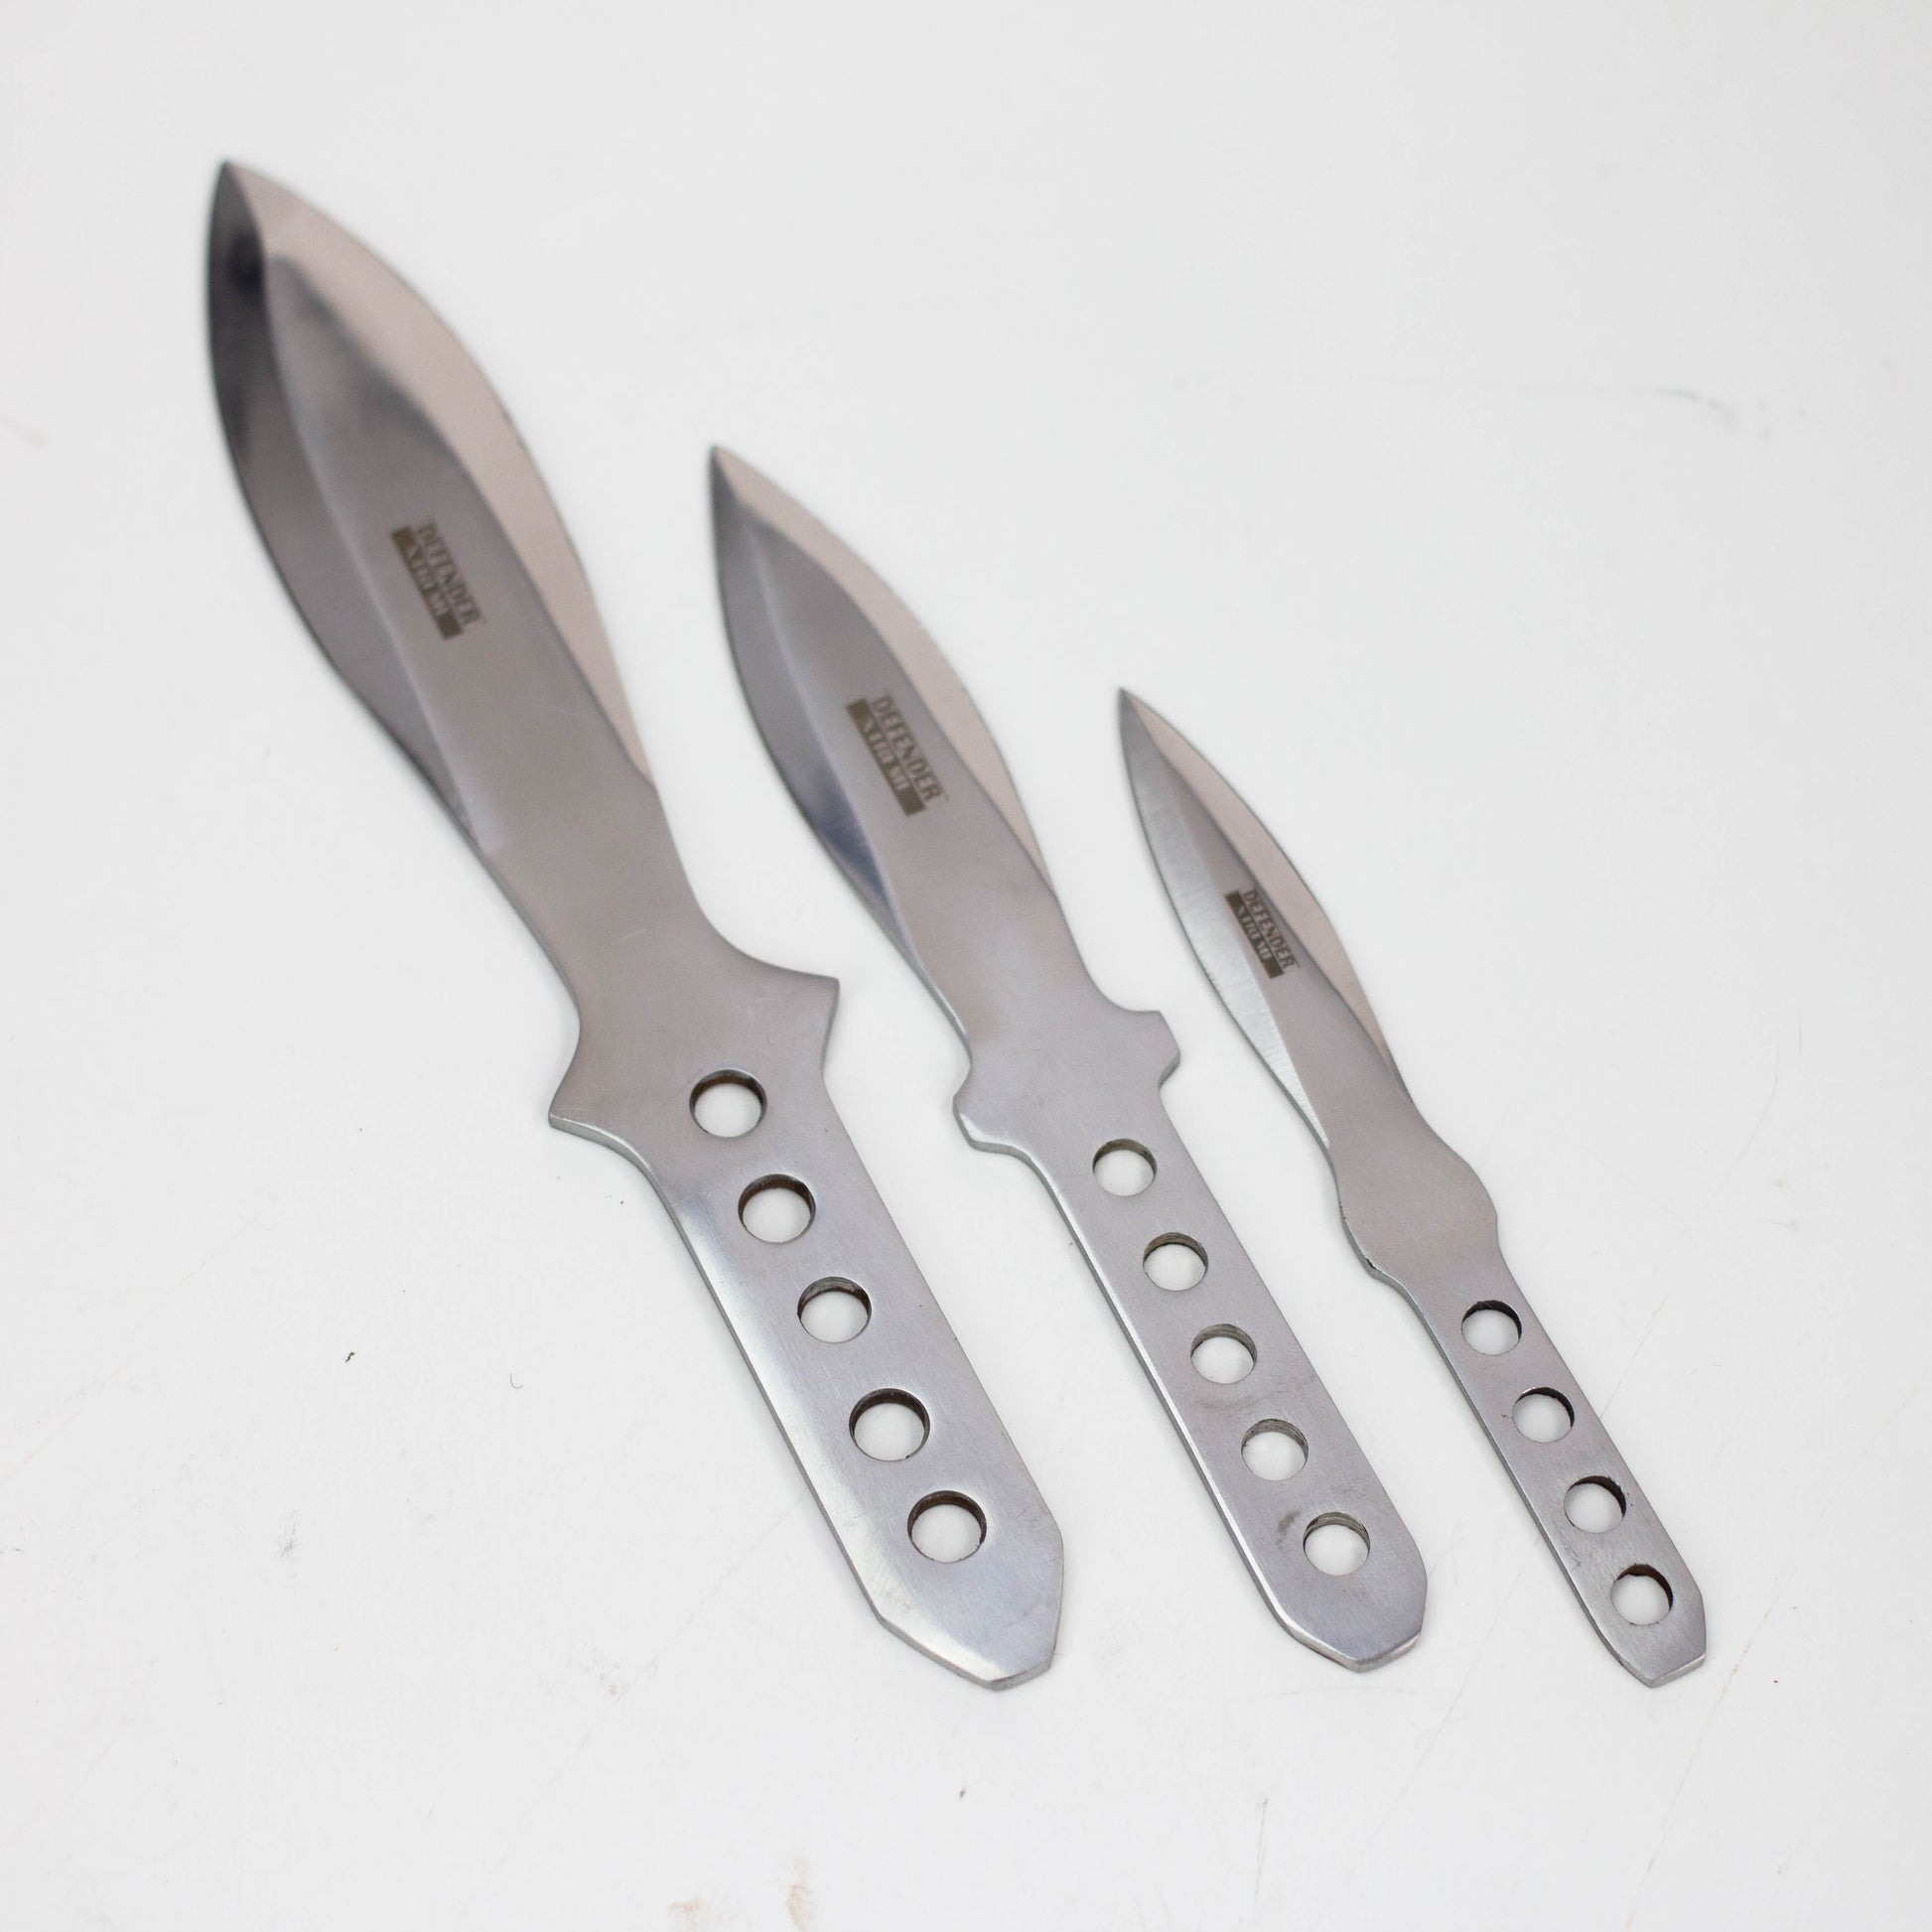 3pc Throwing Stainless steel Knife Set with Sheath [456-S]_1